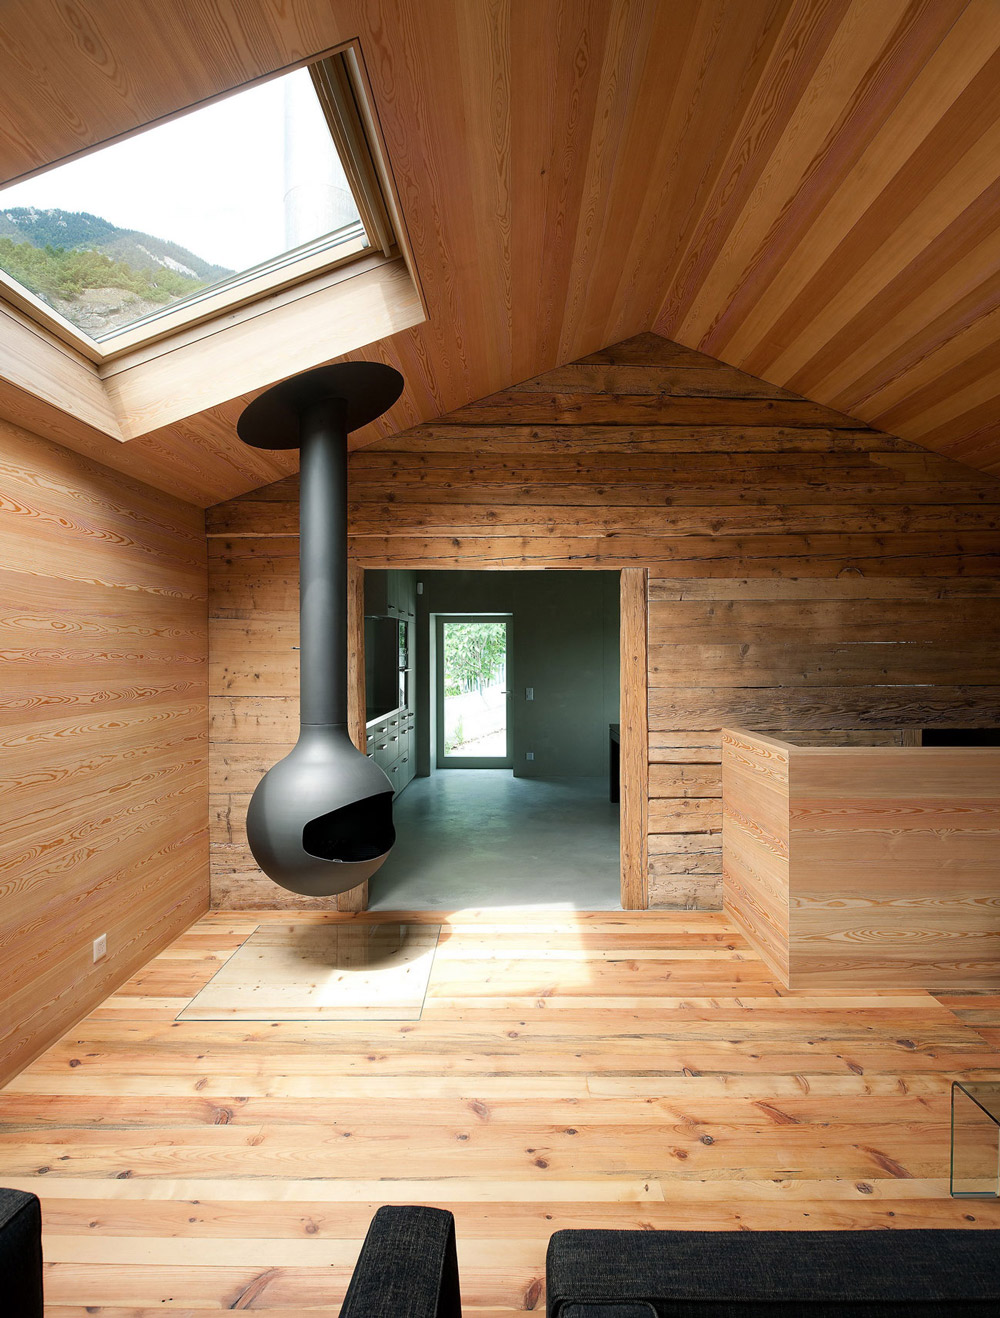 Fireplace, Wooden Flooring, Walls, Ceiling, Home Remodel in Vétroz, Switzerland